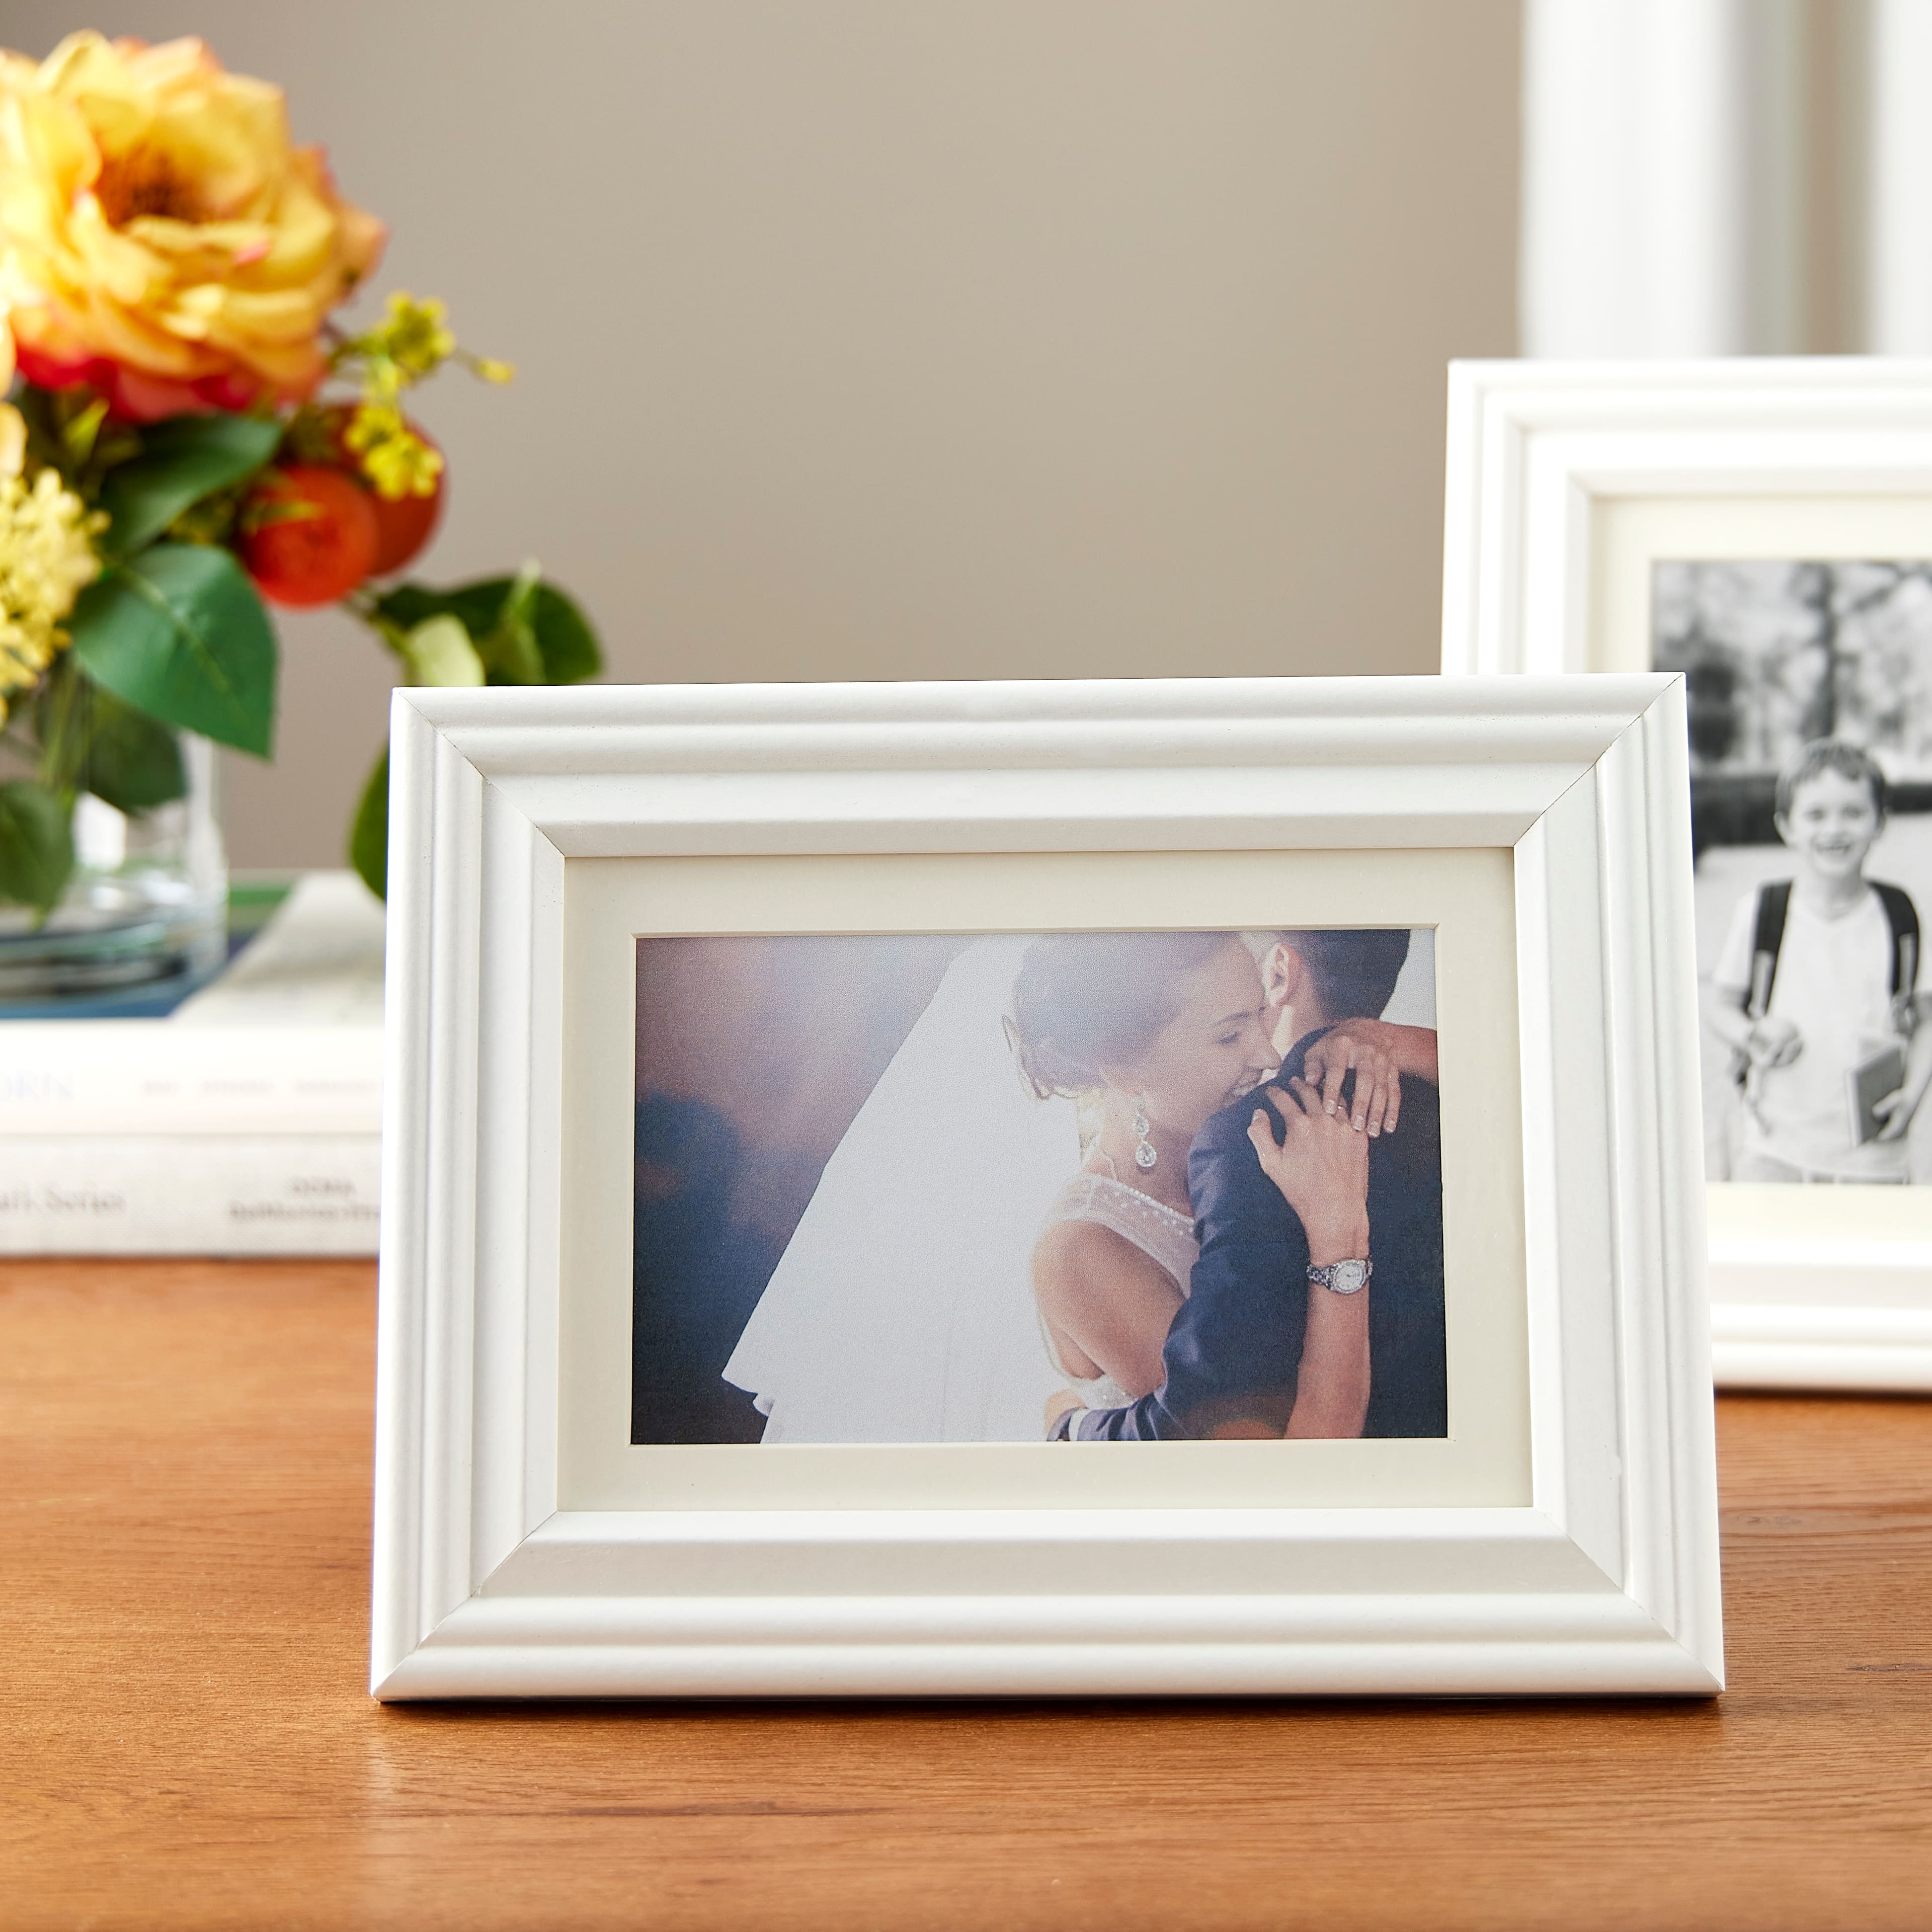 8 Packs: 5 ct. (40 total) White 4&#x22; x 6&#x22; Frame with Mat, Lifestyles by Studio Decor&#xAE;